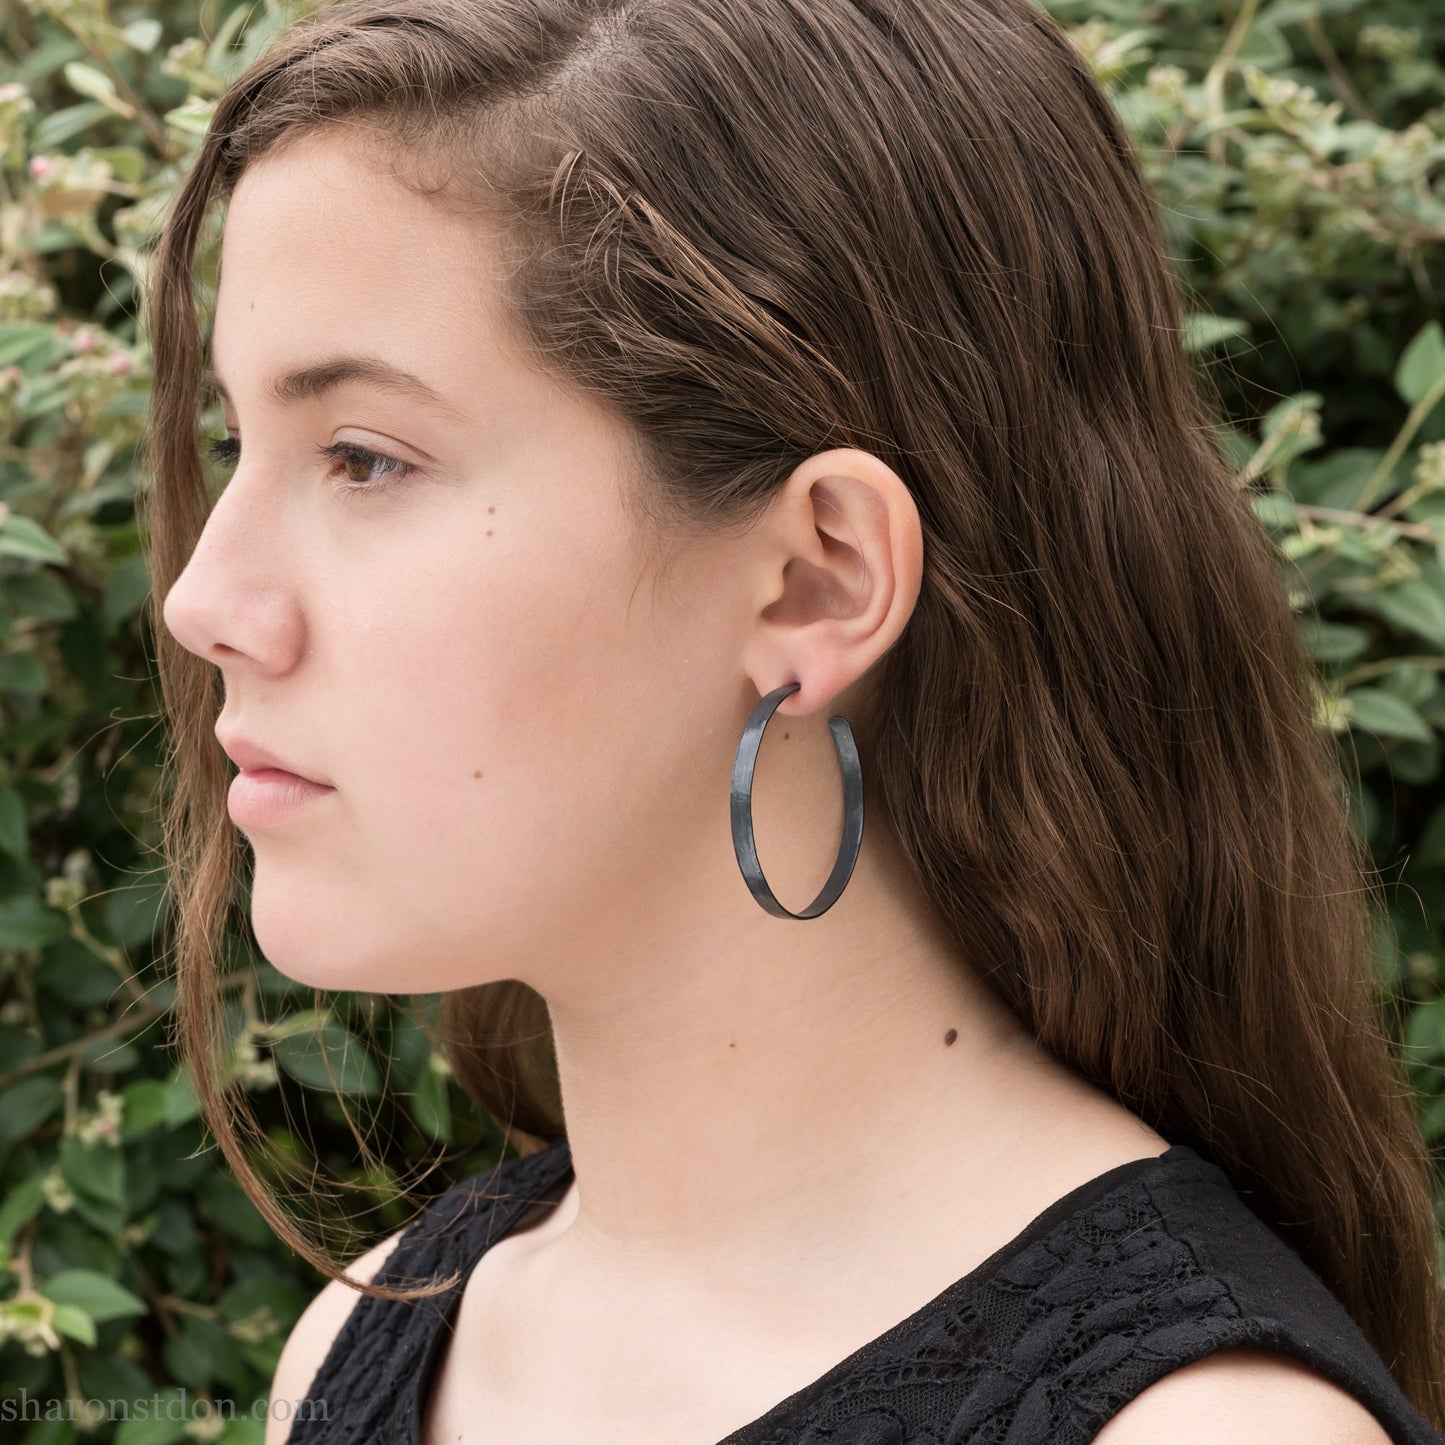 Handmade 925 sterling silver hoop earrings for women. Oxidized black, lightweight large hoop earrings handmade and hammered by Sharon SaintDon in the Pacific Northwest of the USA. 50mm diameter, 5mm wide.